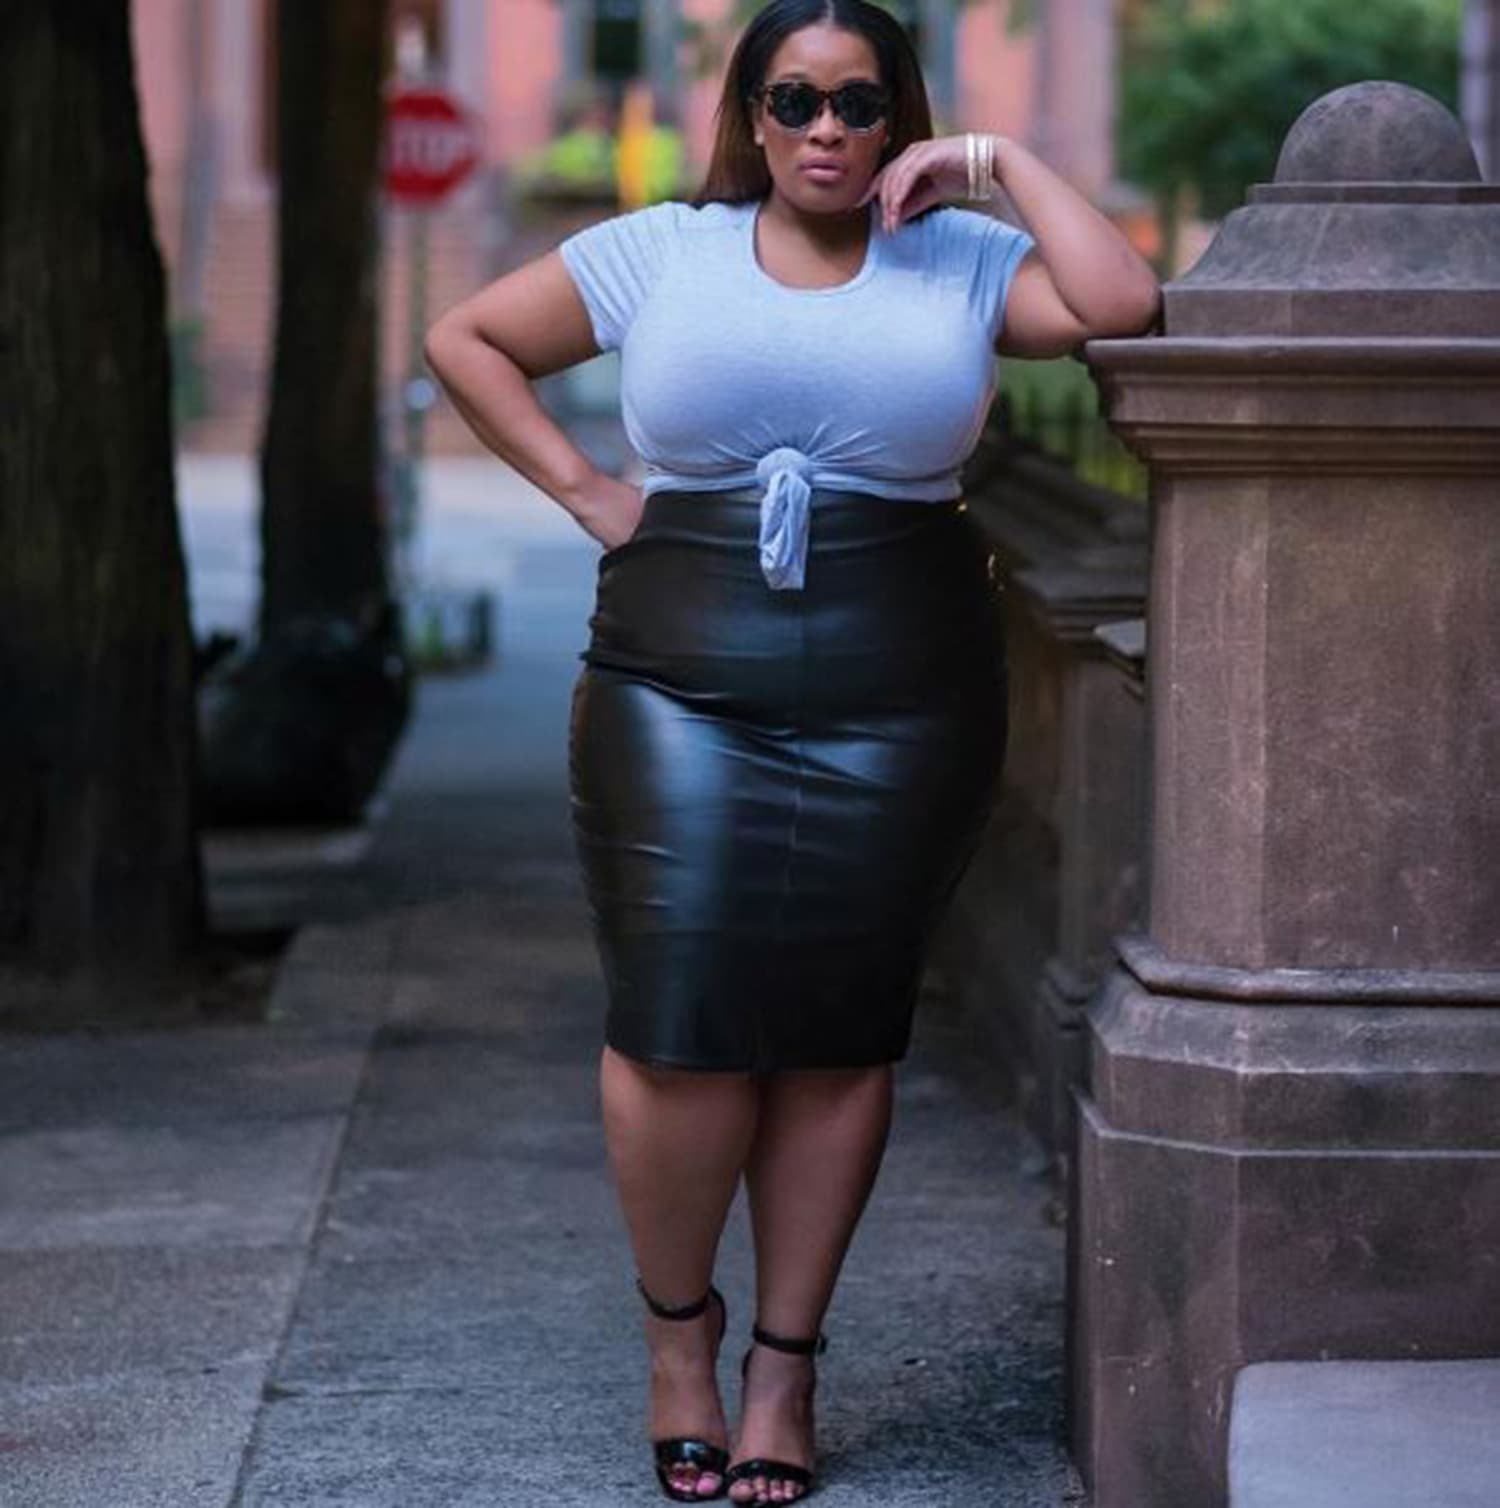 Plus Size Model Celebrates Curves and Inclusion with Body Confidence Pool  Party